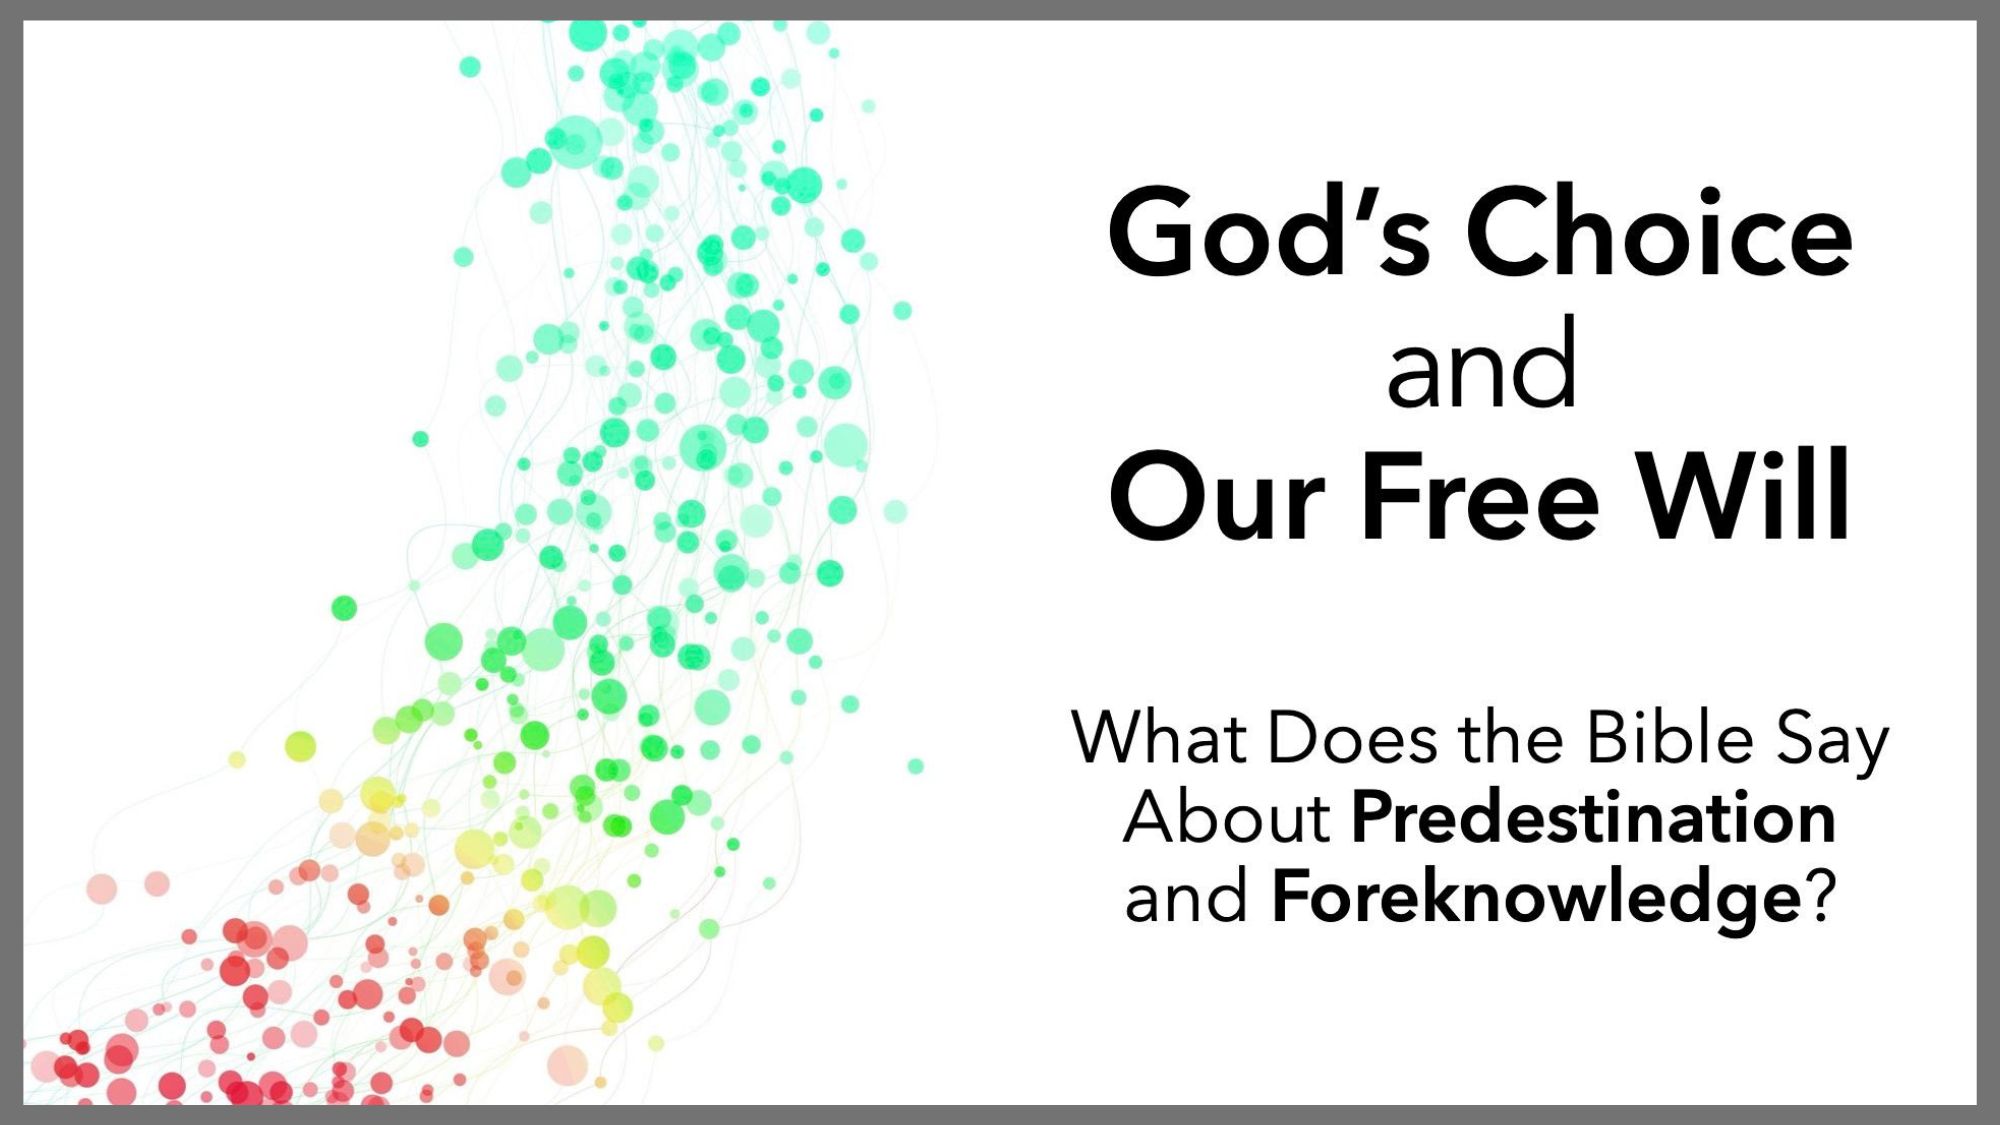 God's Choice and Our Free Will